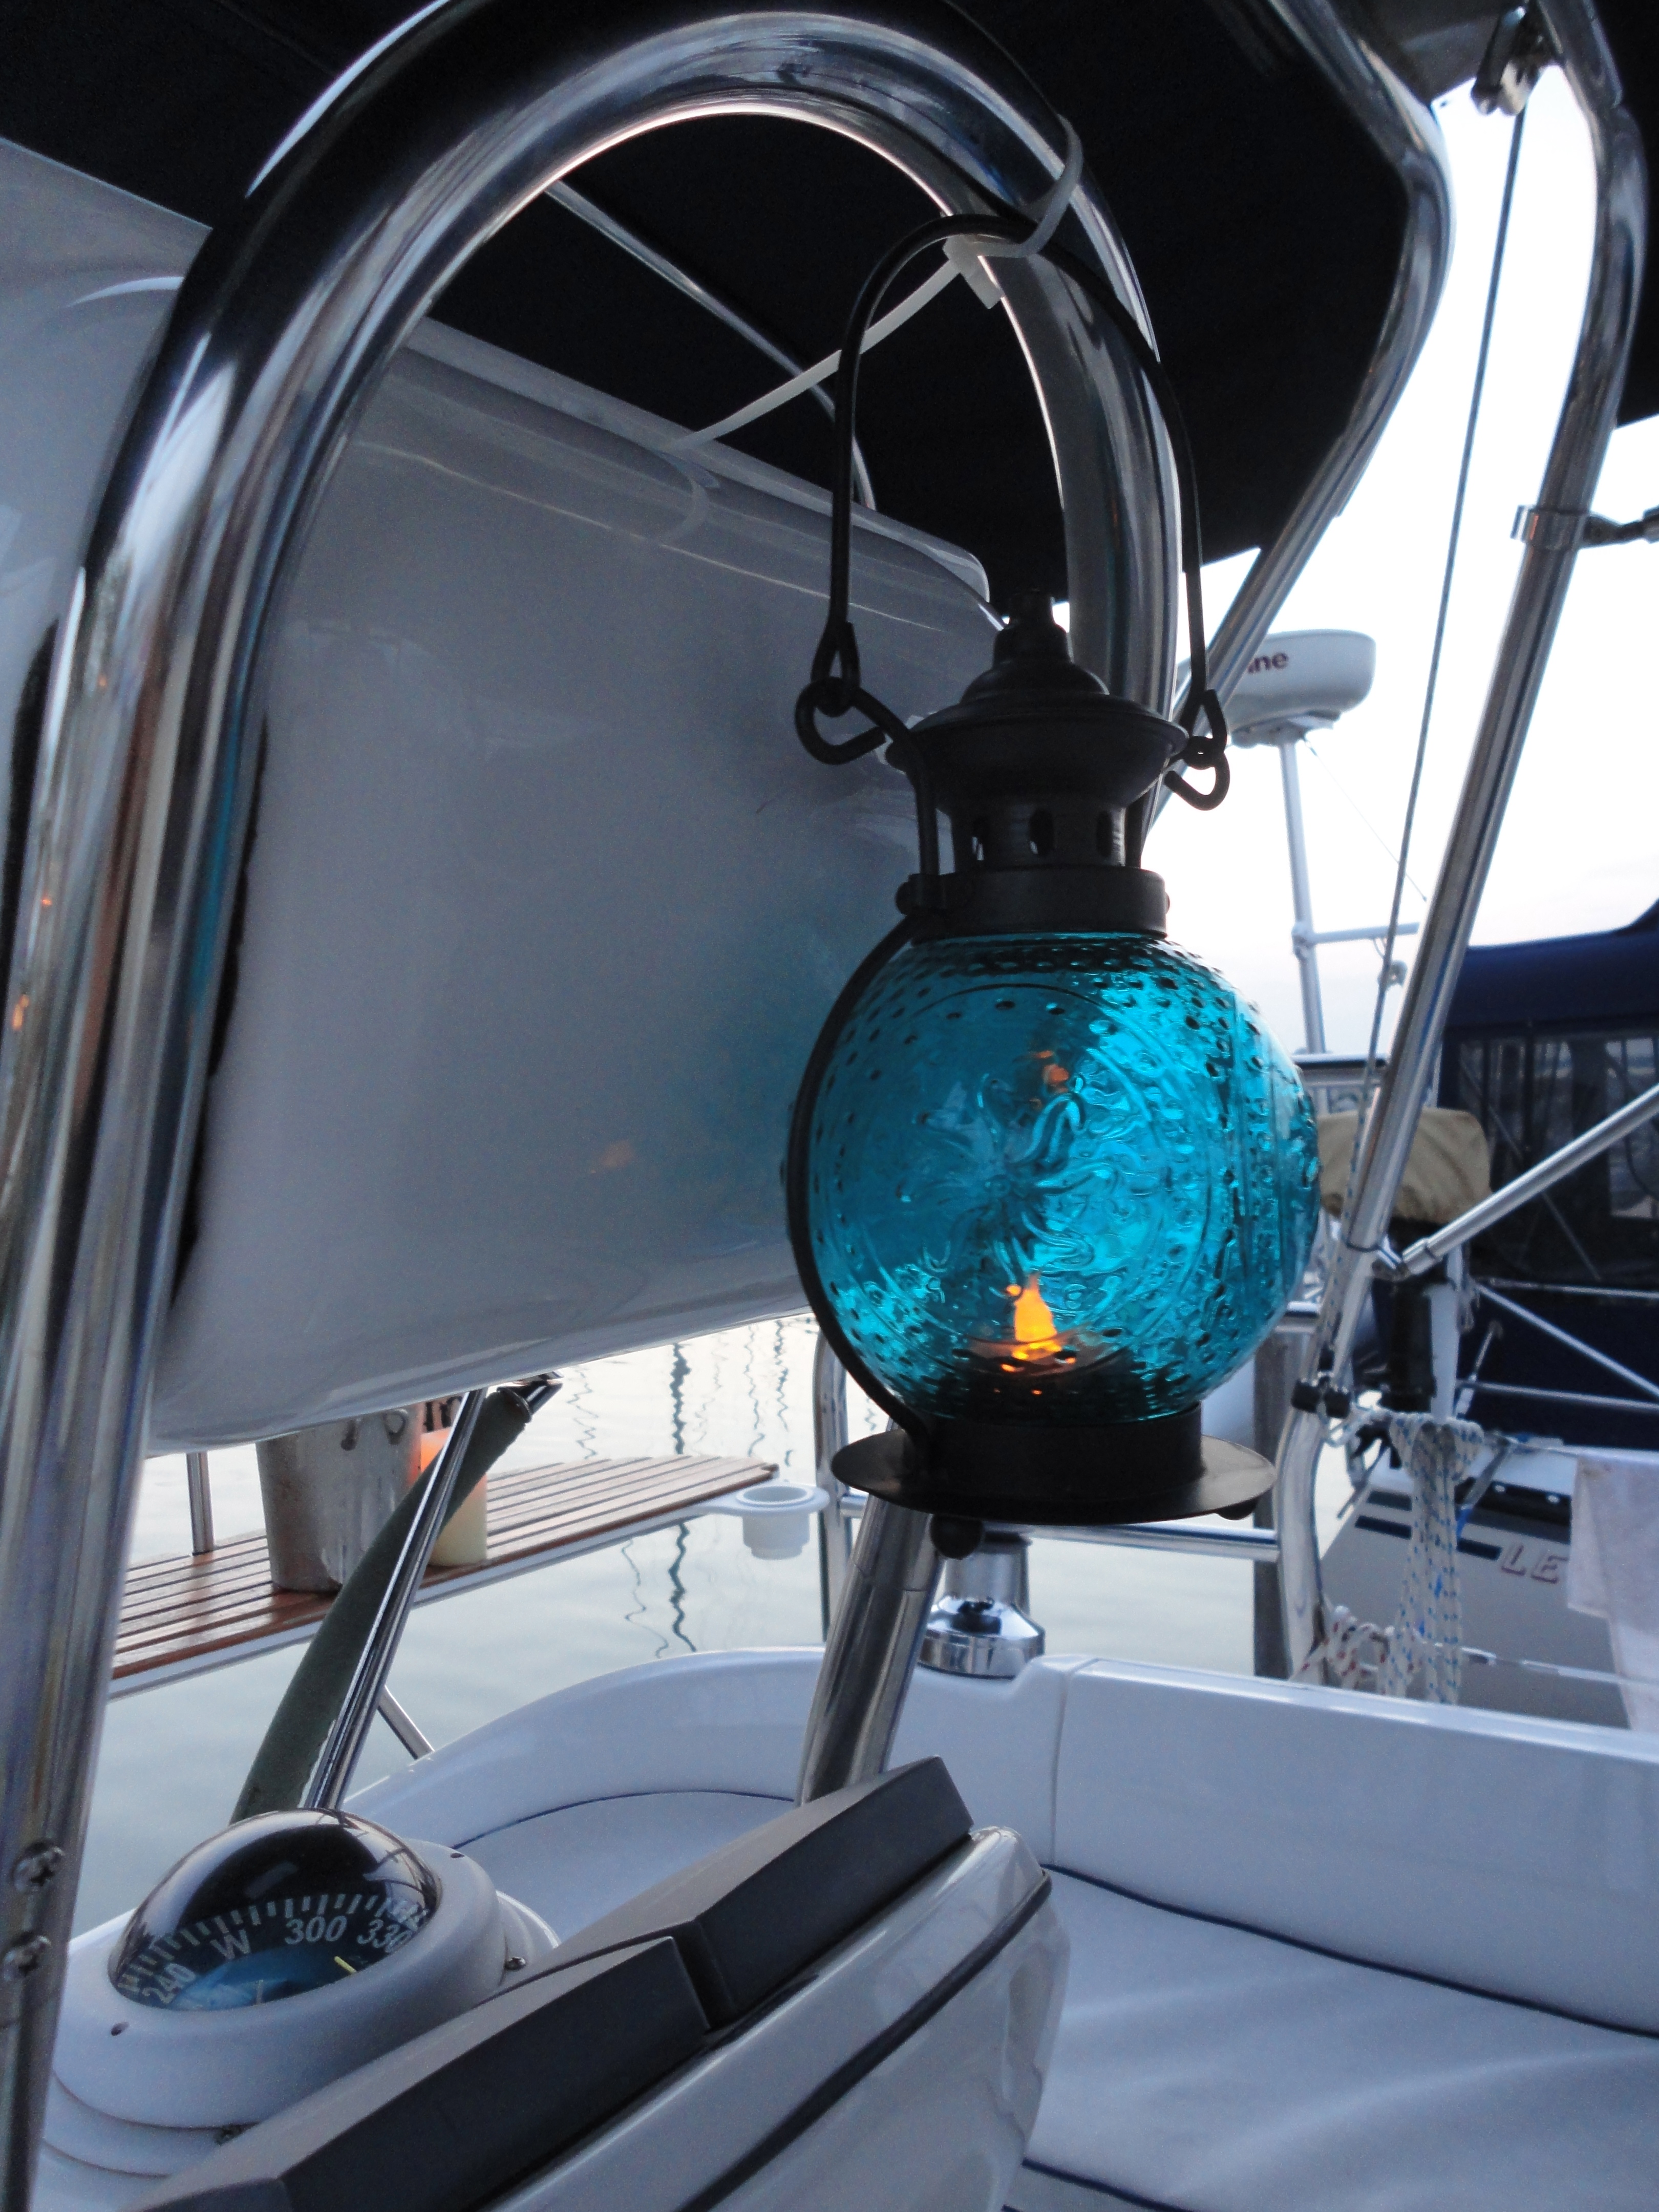 Candle hanging on the sailboat